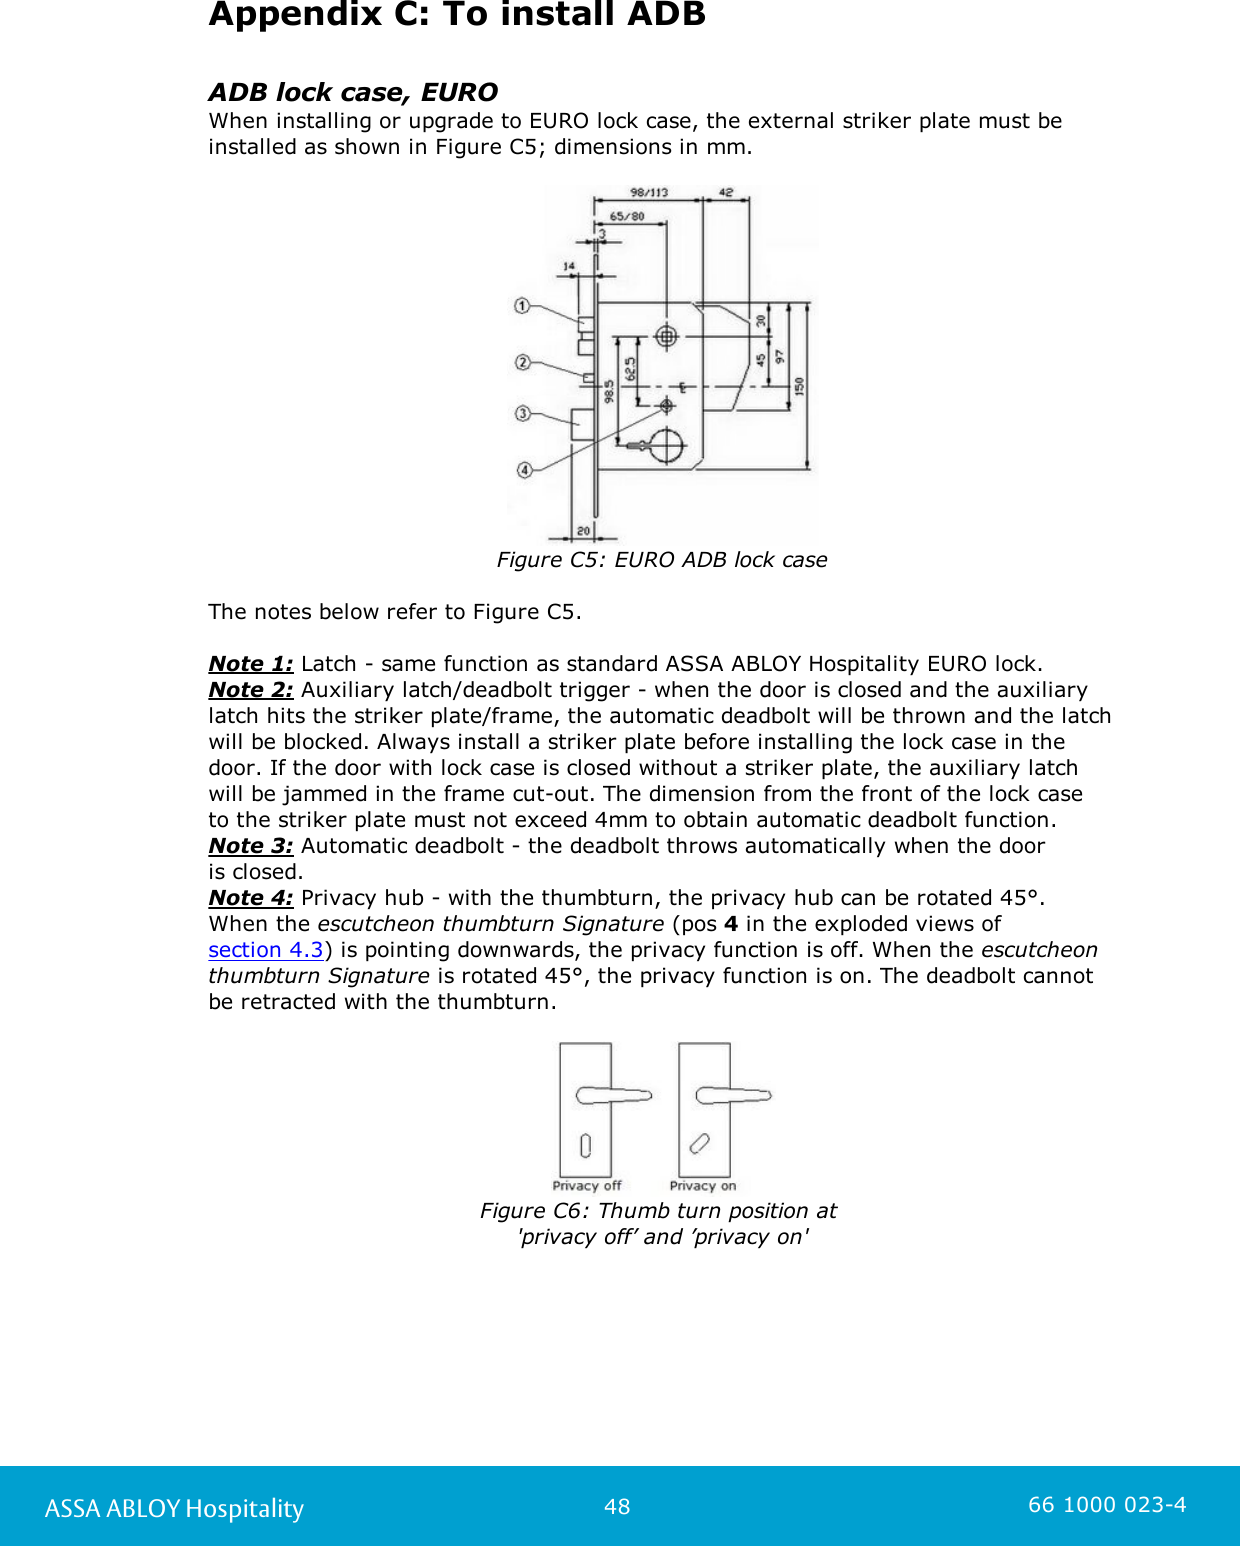 48ASSA ABLOY Hospitality 66 1000 023-4Appendix C: To install ADBADB lock case, EUROWhen installing or upgrade to EURO lock case, the external striker plate must beinstalled as shown in Figure C5; dimensions in mm.Figure C5: EURO ADB lock caseThe notes below refer to Figure C5.Note 1: Latch - same function as standard ASSA ABLOY Hospitality EURO lock. Note 2: Auxiliary latch/deadbolt trigger - when the door is closed and the auxiliarylatch hits the striker plate/frame, the automatic deadbolt will be thrown and the latchwill be blocked. Always install a striker plate before installing the lock case in thedoor. If the door with lock case is closed without a striker plate, the auxiliary latchwill be jammed in the frame cut-out. The dimension from the front of the lock case to the striker plate must not exceed 4mm to obtain automatic deadbolt function. Note 3: Automatic deadbolt - the deadbolt throws automatically when the door is closed. Note 4: Privacy hub - with the thumbturn, the privacy hub can be rotated 45°. When the escutcheon thumbturn Signature (pos 4 in the exploded views of section 4.3) is pointing downwards, the privacy function is off. When the escutcheonthumbturn Signature is rotated 45°, the privacy function is on. The deadbolt cannotbe retracted with the thumbturn.Figure C6: Thumb turn position at &apos;privacy off’ and ’privacy on&apos;